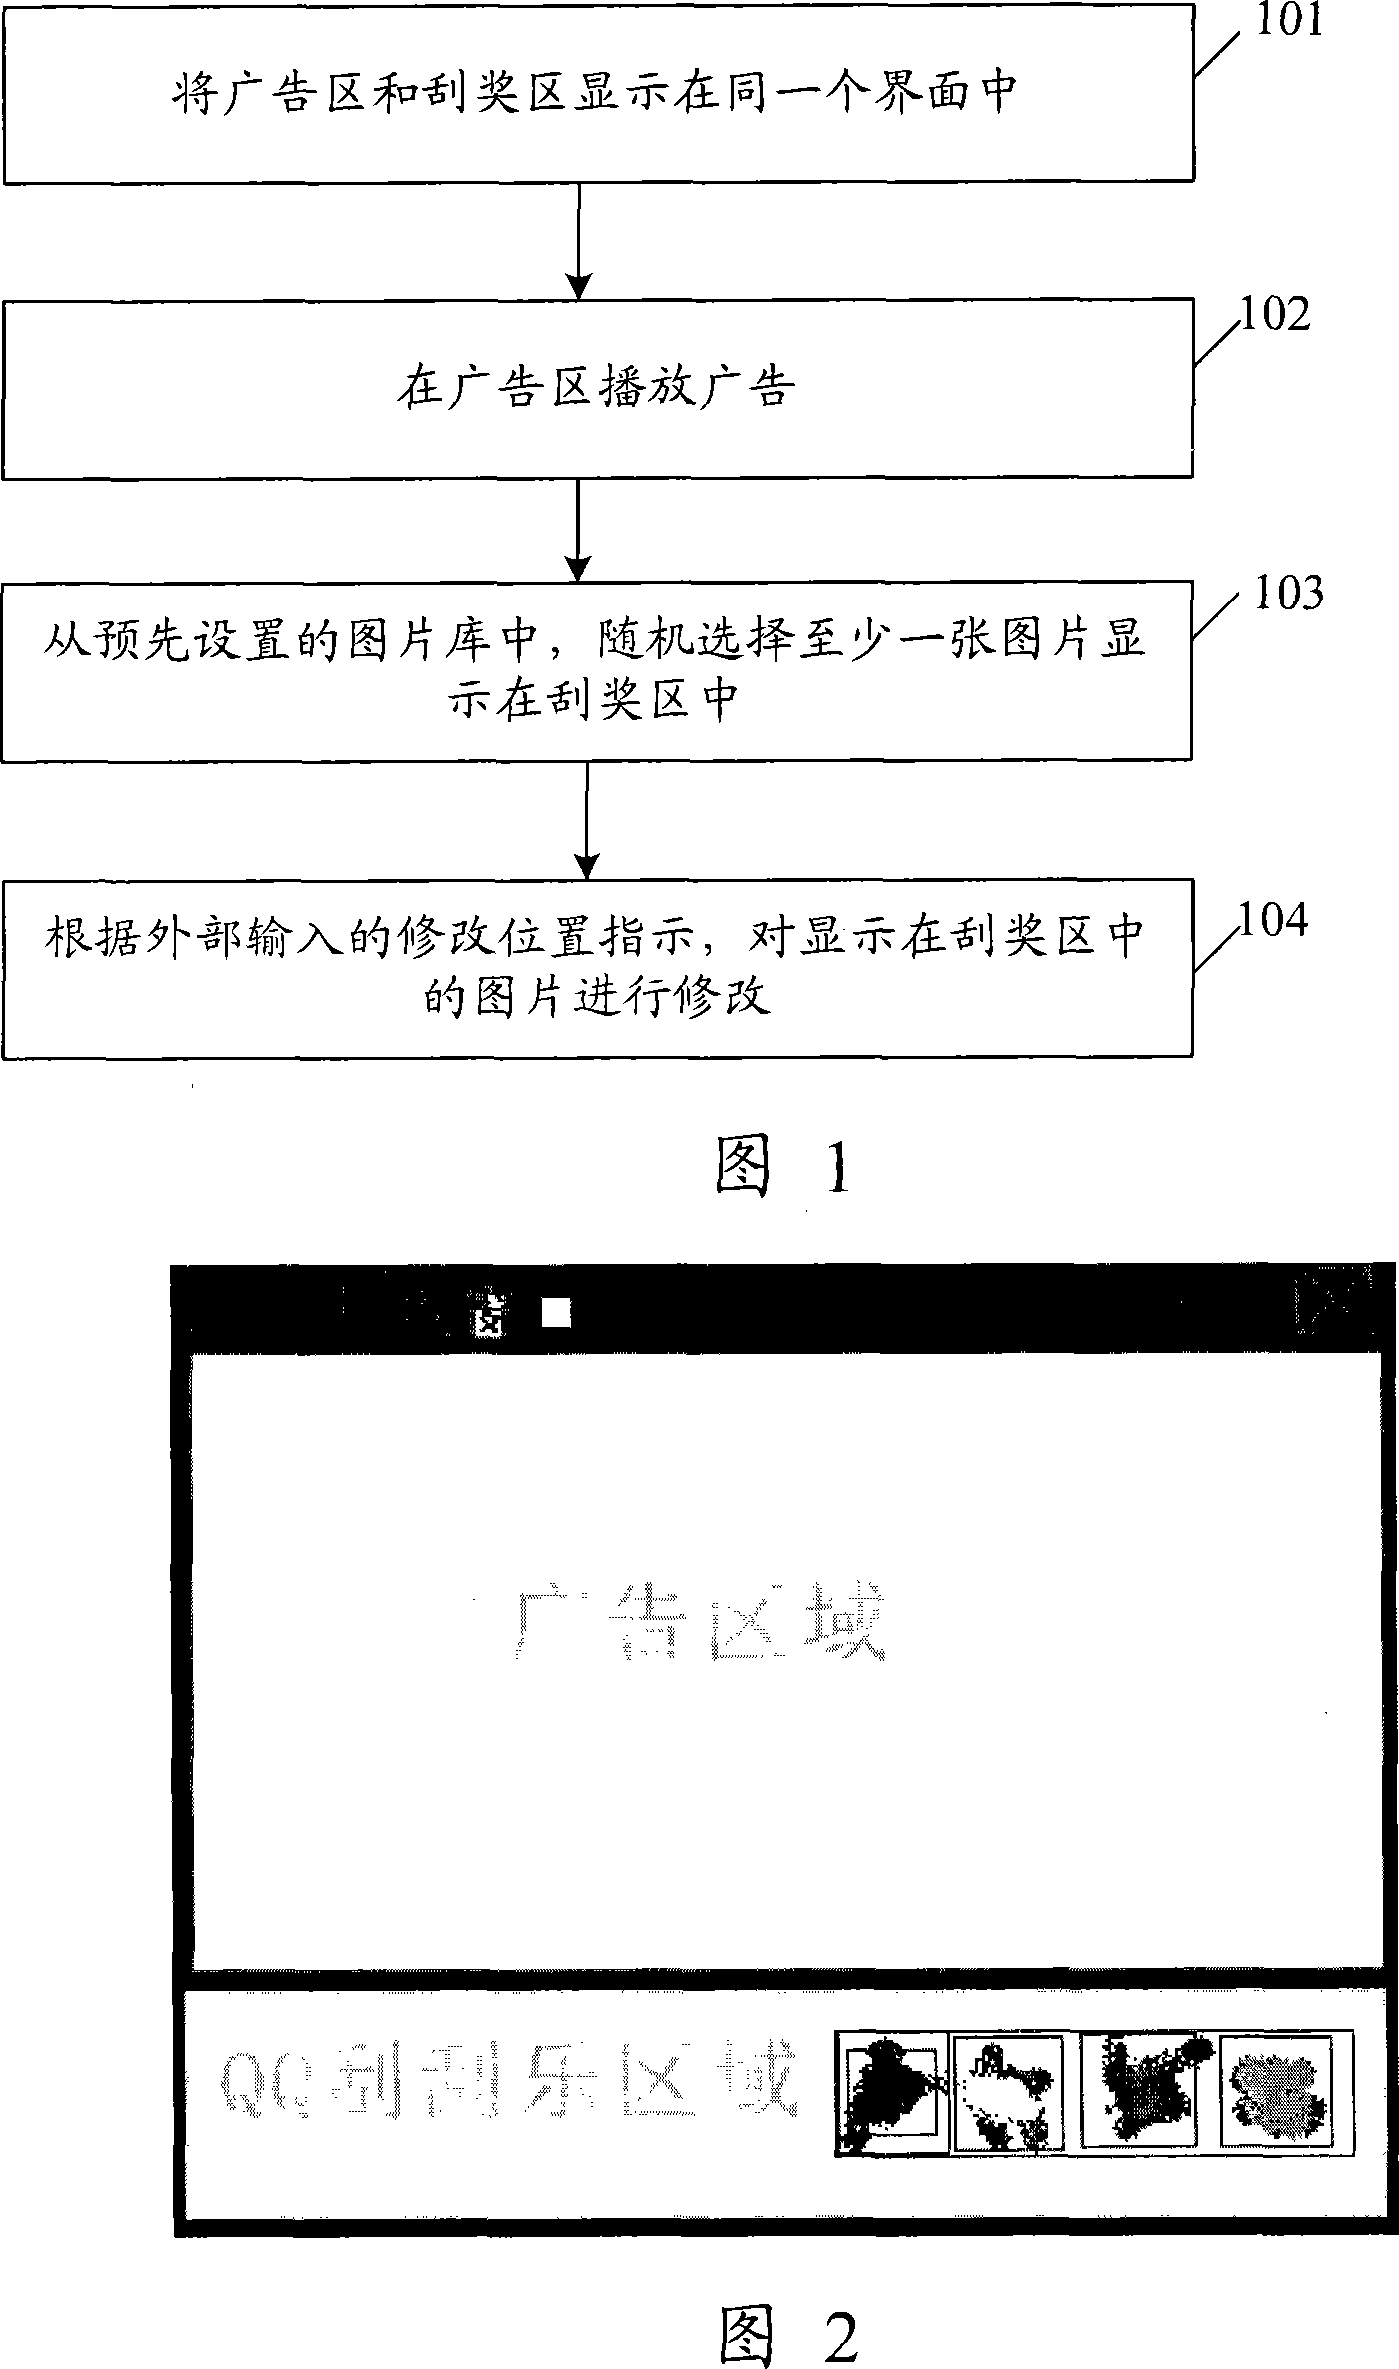 Method and apparatus for implementing network advertisement